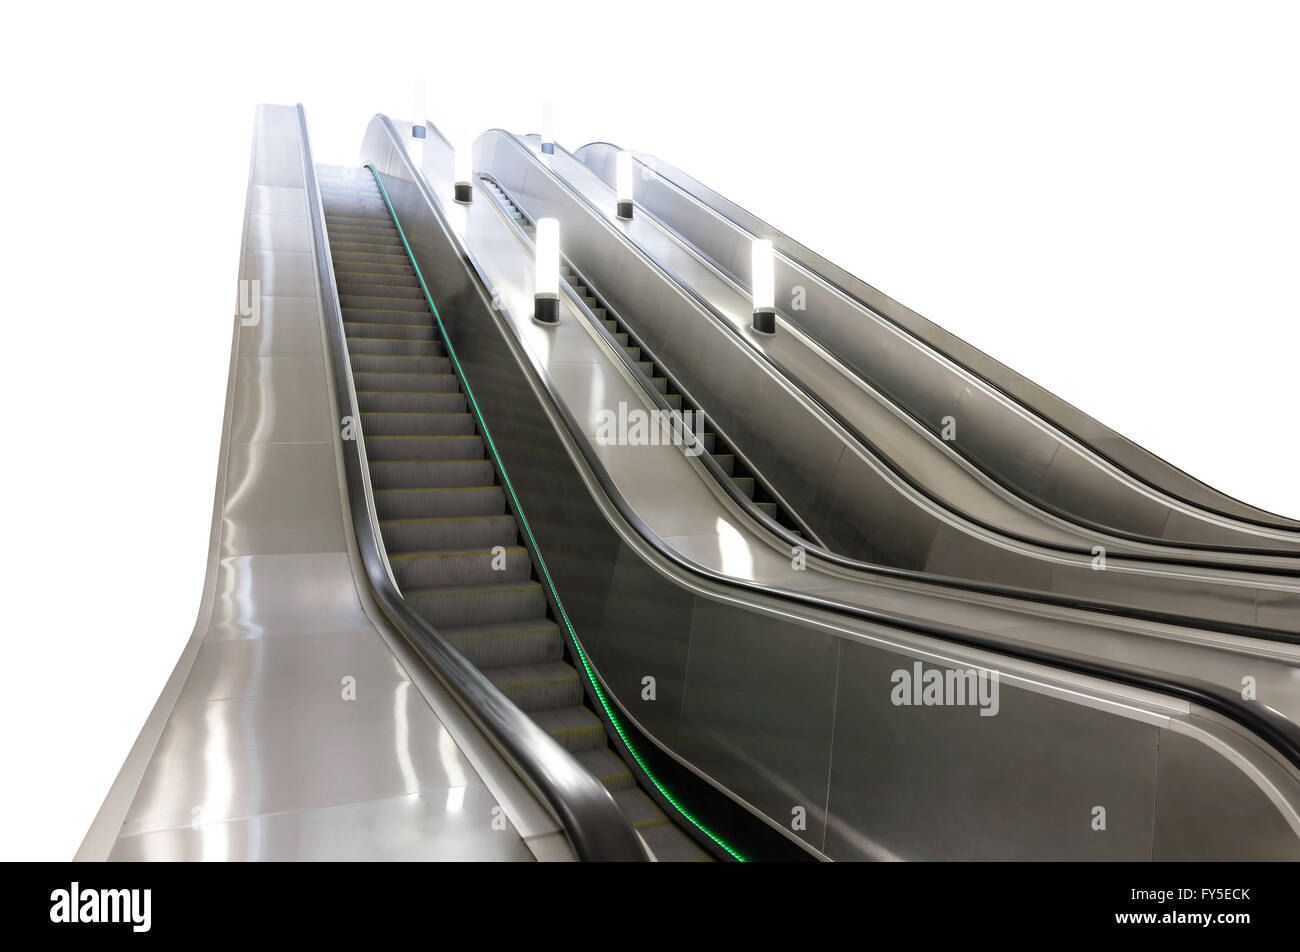 Isolated modern escalator with lamps in Moscow metro, Russia. Stock Photo